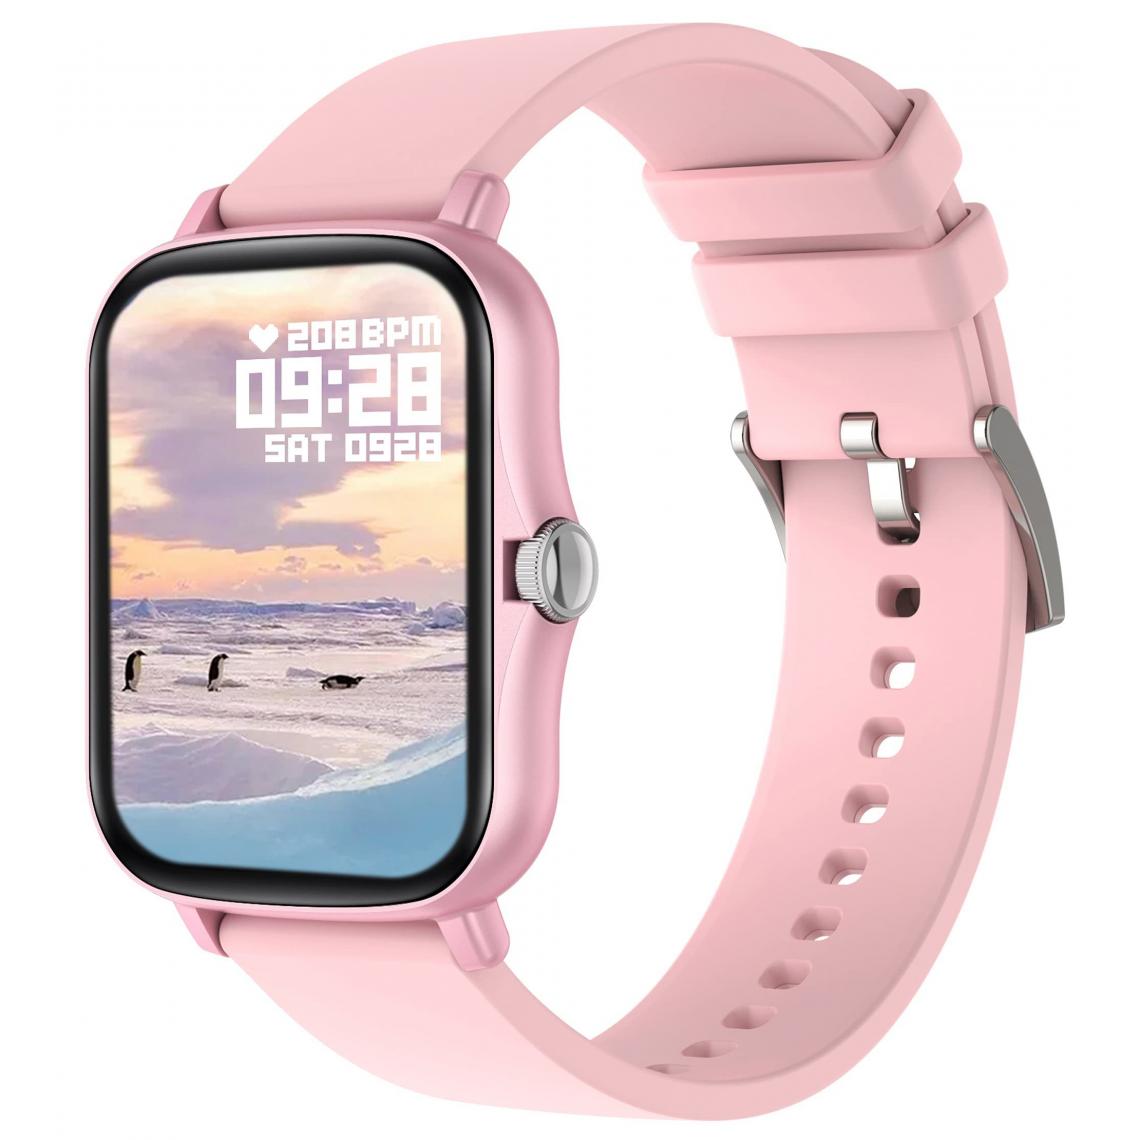 Chronotech Montres - Chronus Smart Watch Fitness Tracker Heart Rate Monitor Blood Pressure Waterproof Pedometer Sleep Monitor Full Touch Color Screen Smart Watches for Women Menï¼pink - Montre connectée